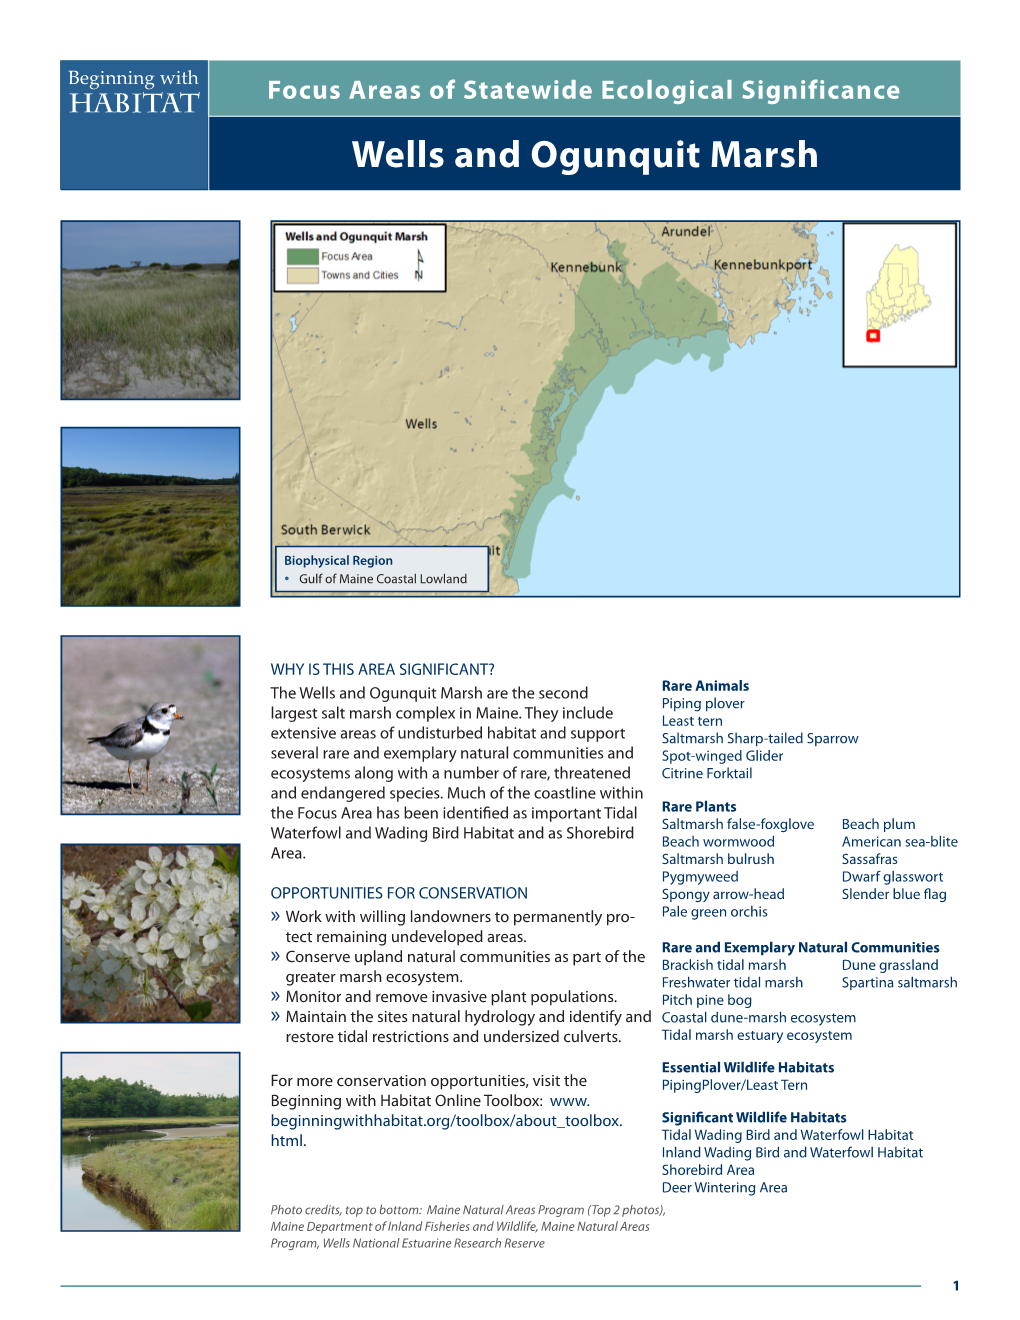 Wells and Ogunquit Marsh Beginning with Focus Areas of Statewide Ecological Significance Habitat Wells and Ogunquit Marsh